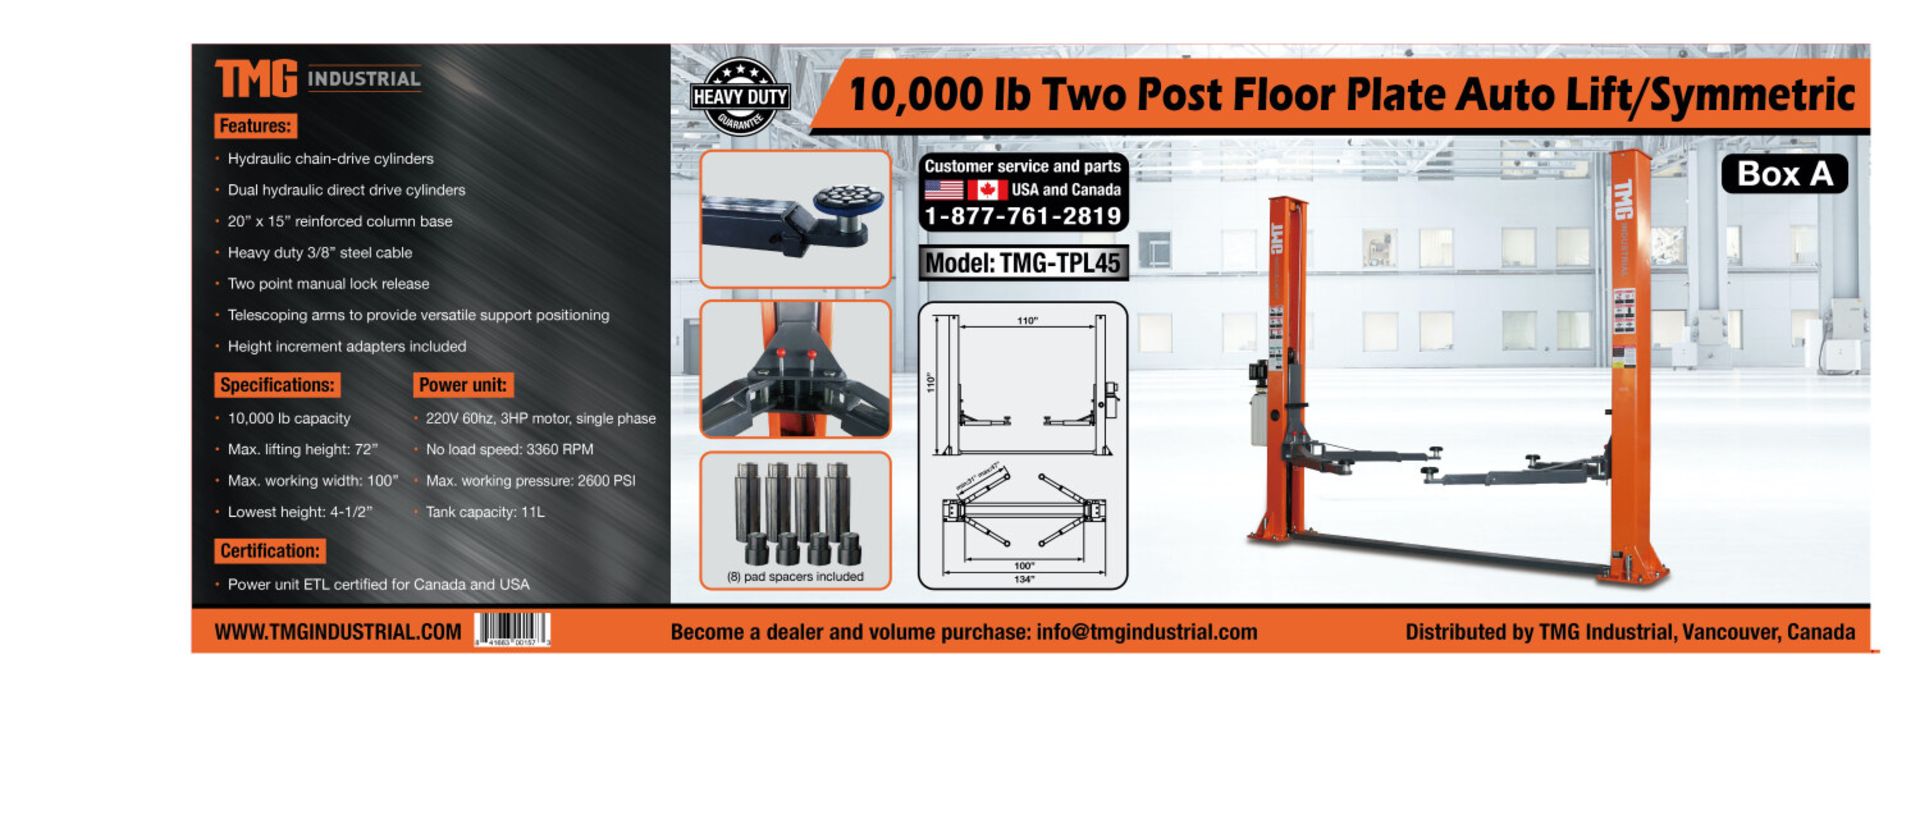 TMG-TPL45 TMG INDUSTRIAL 10,000-LB TWO POST FLOOR PLATE AUTO LIFT, SYMMETRIC ARMS, 77'' LIFT HEIGHT, - Image 4 of 6